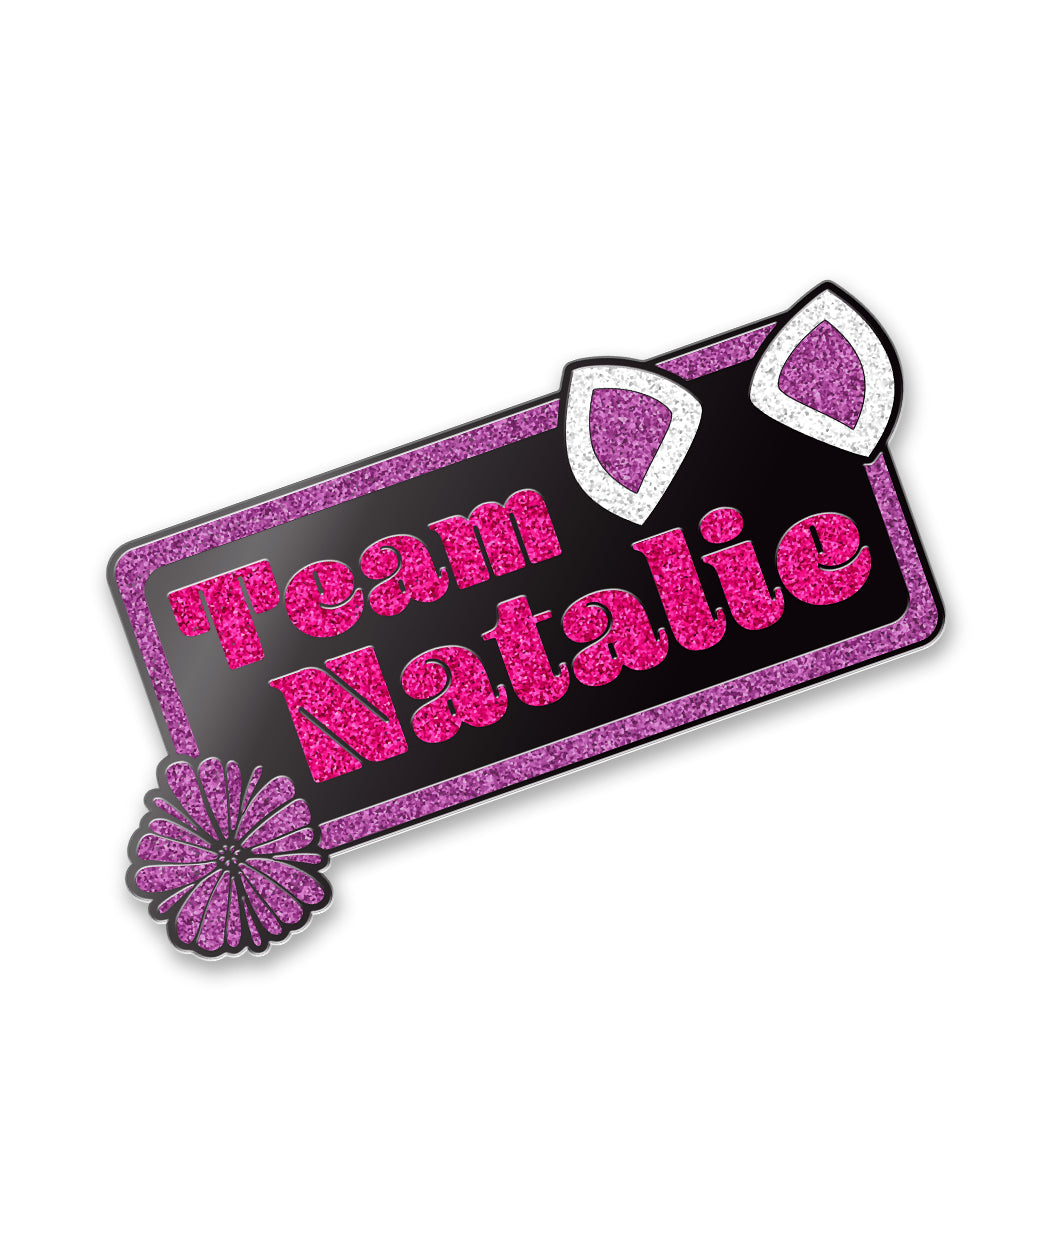 Rectangle pin with curved edges, purple glitter outline and black fill. Bottom left of rectangle is a purple glitter flower. Top right are two white glitter cat ears with glitter pink fill. “Team Natalie” is inside of rectangle in pink serif glitter font from Linsay Ellis.